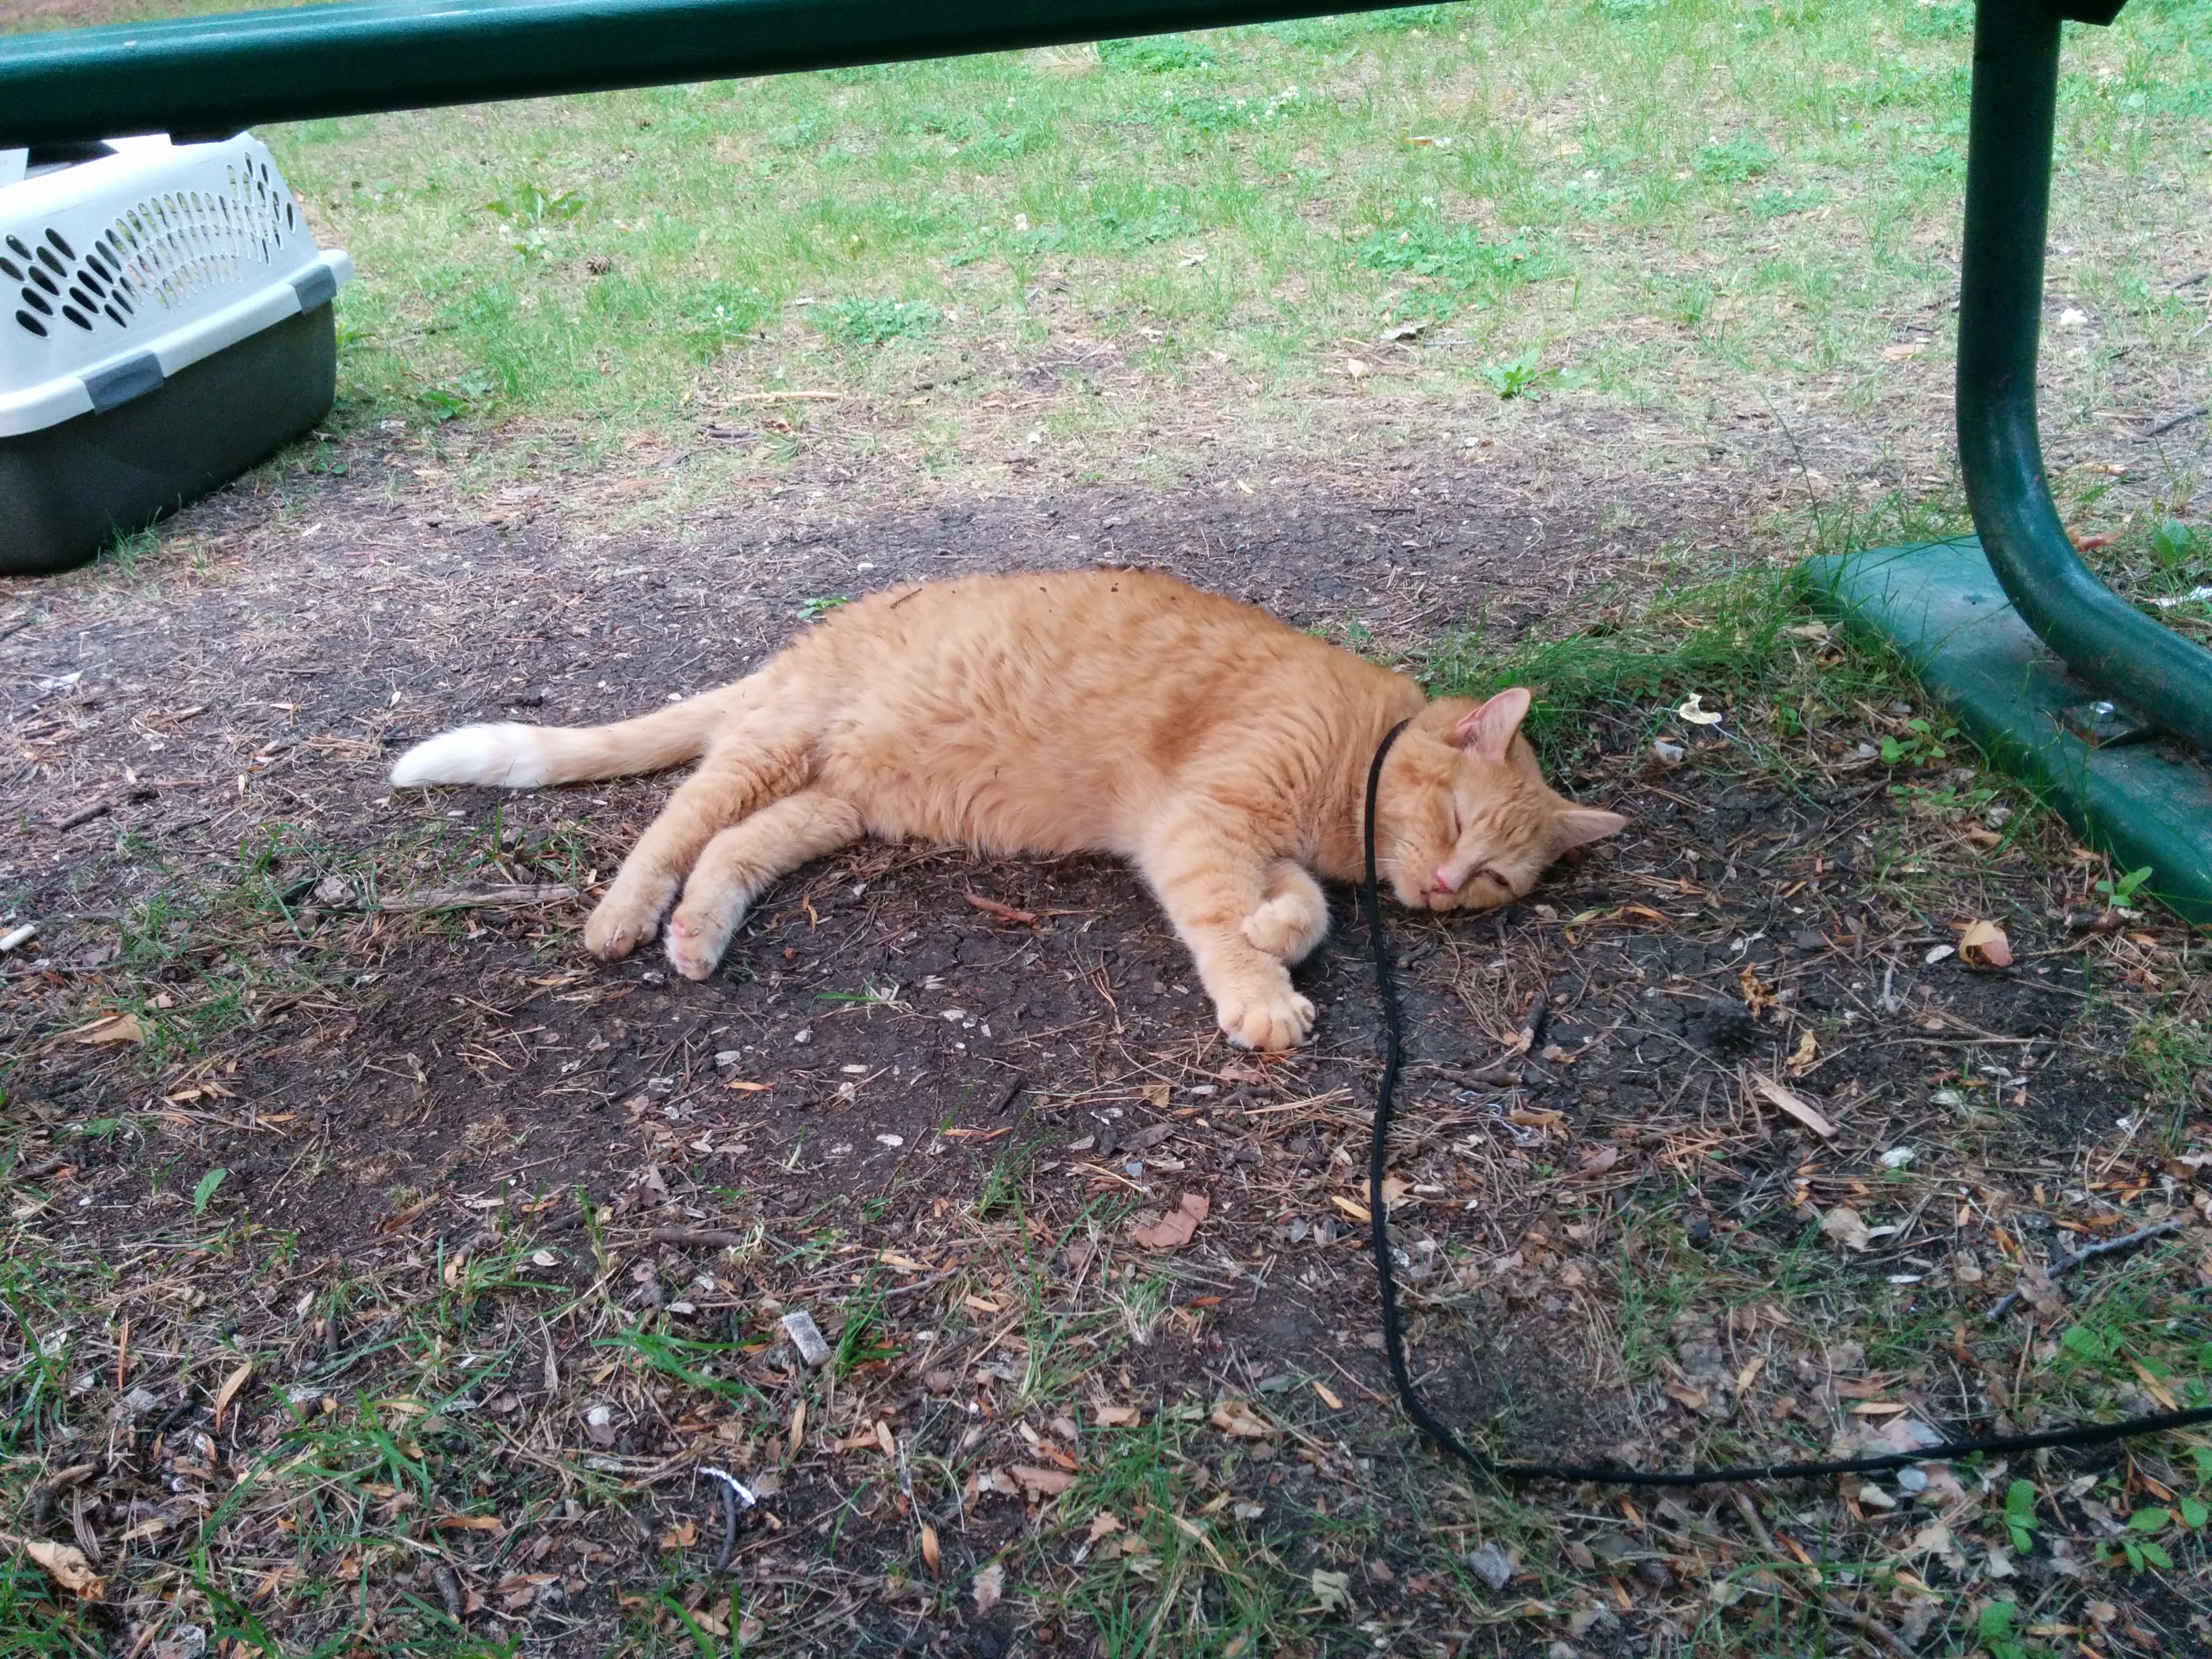 Jack laying asleep under a green picnic table in a park, on the general dirt and park chips that are there.